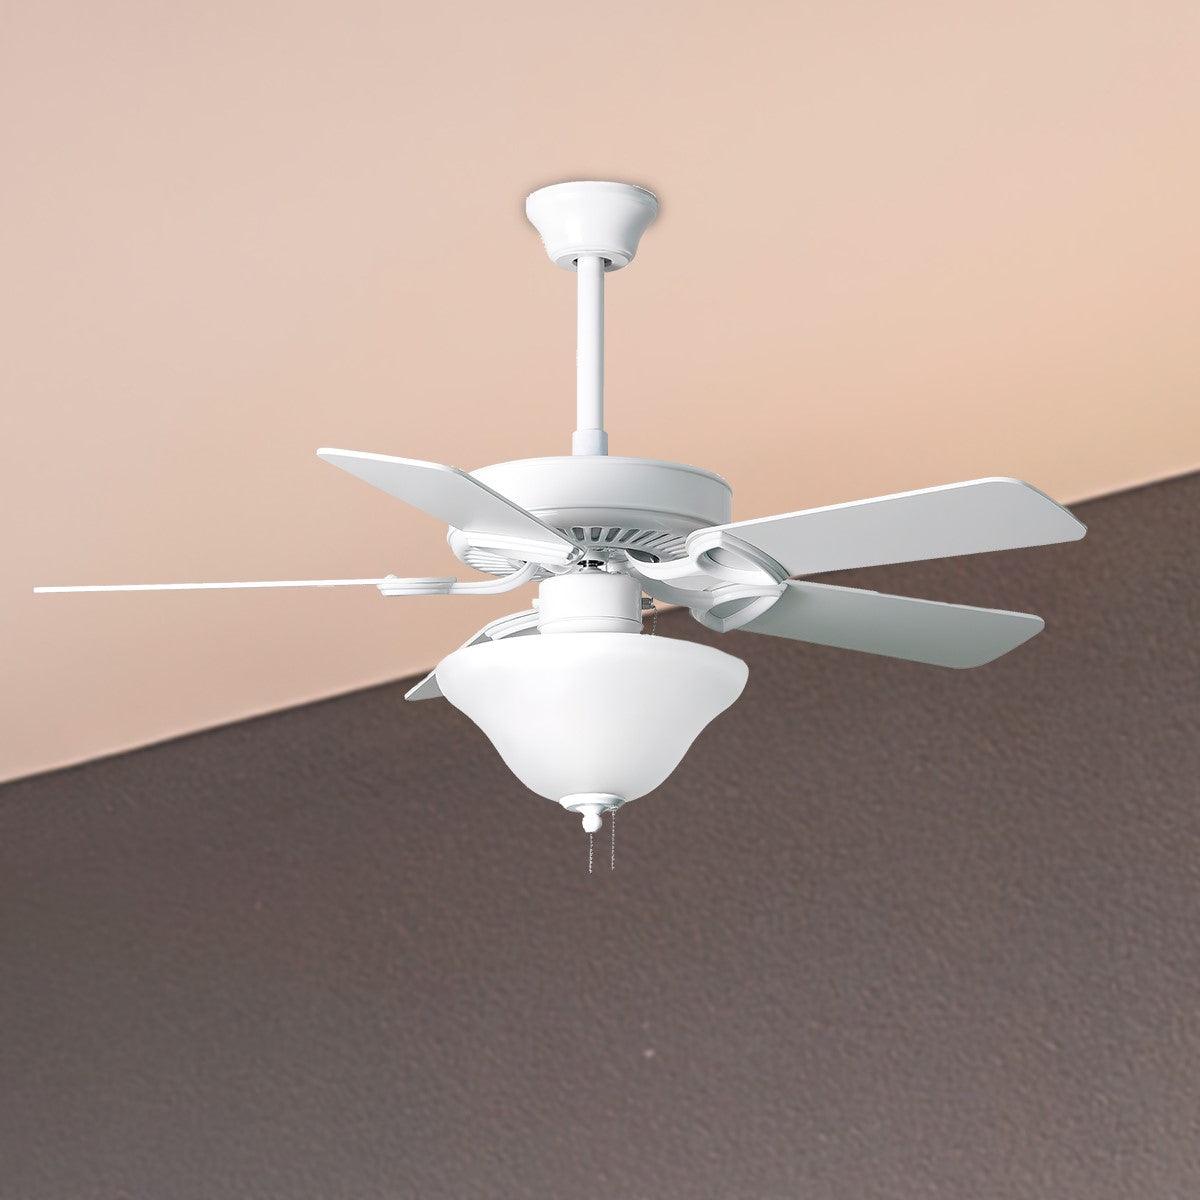 America USA 42 Inch 5 Blades Ceiling Fan With Light And Pull Chain, Gloss White Finish - Bees Lighting